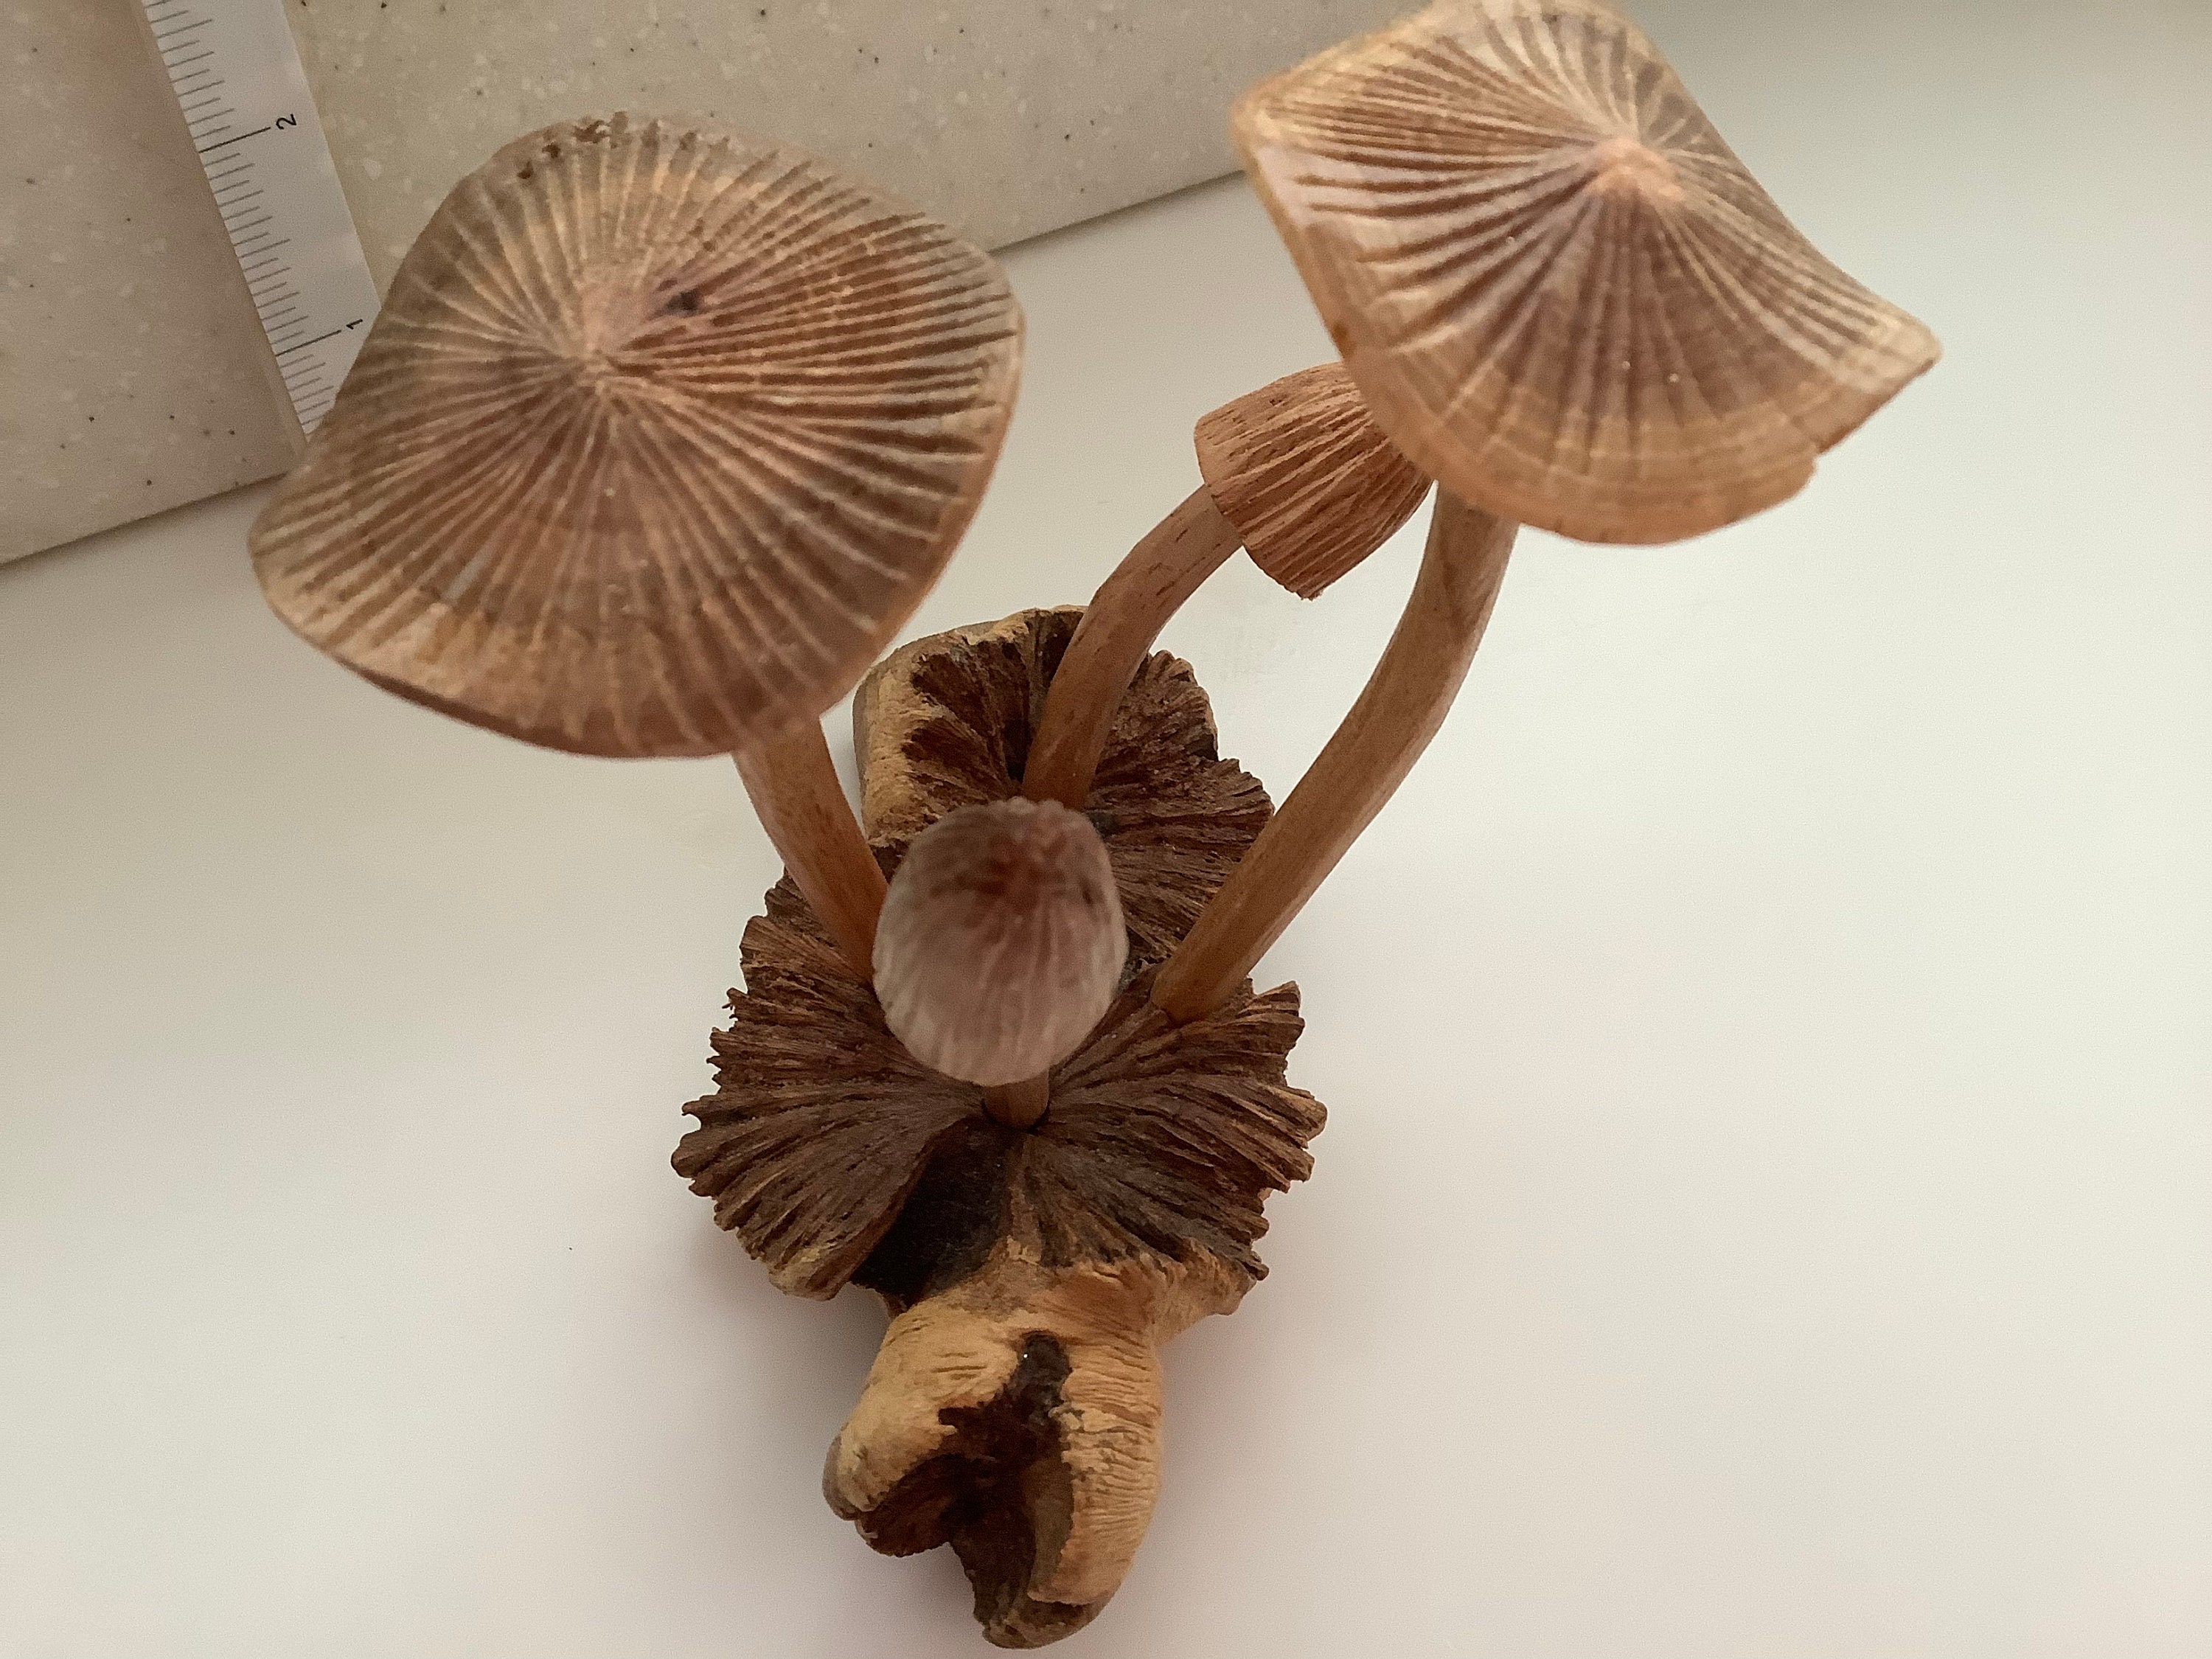 Figurine, Mushrooms, Carved Wood Sculptures, American, 20th Century –  George Glazer Gallery, Antiques